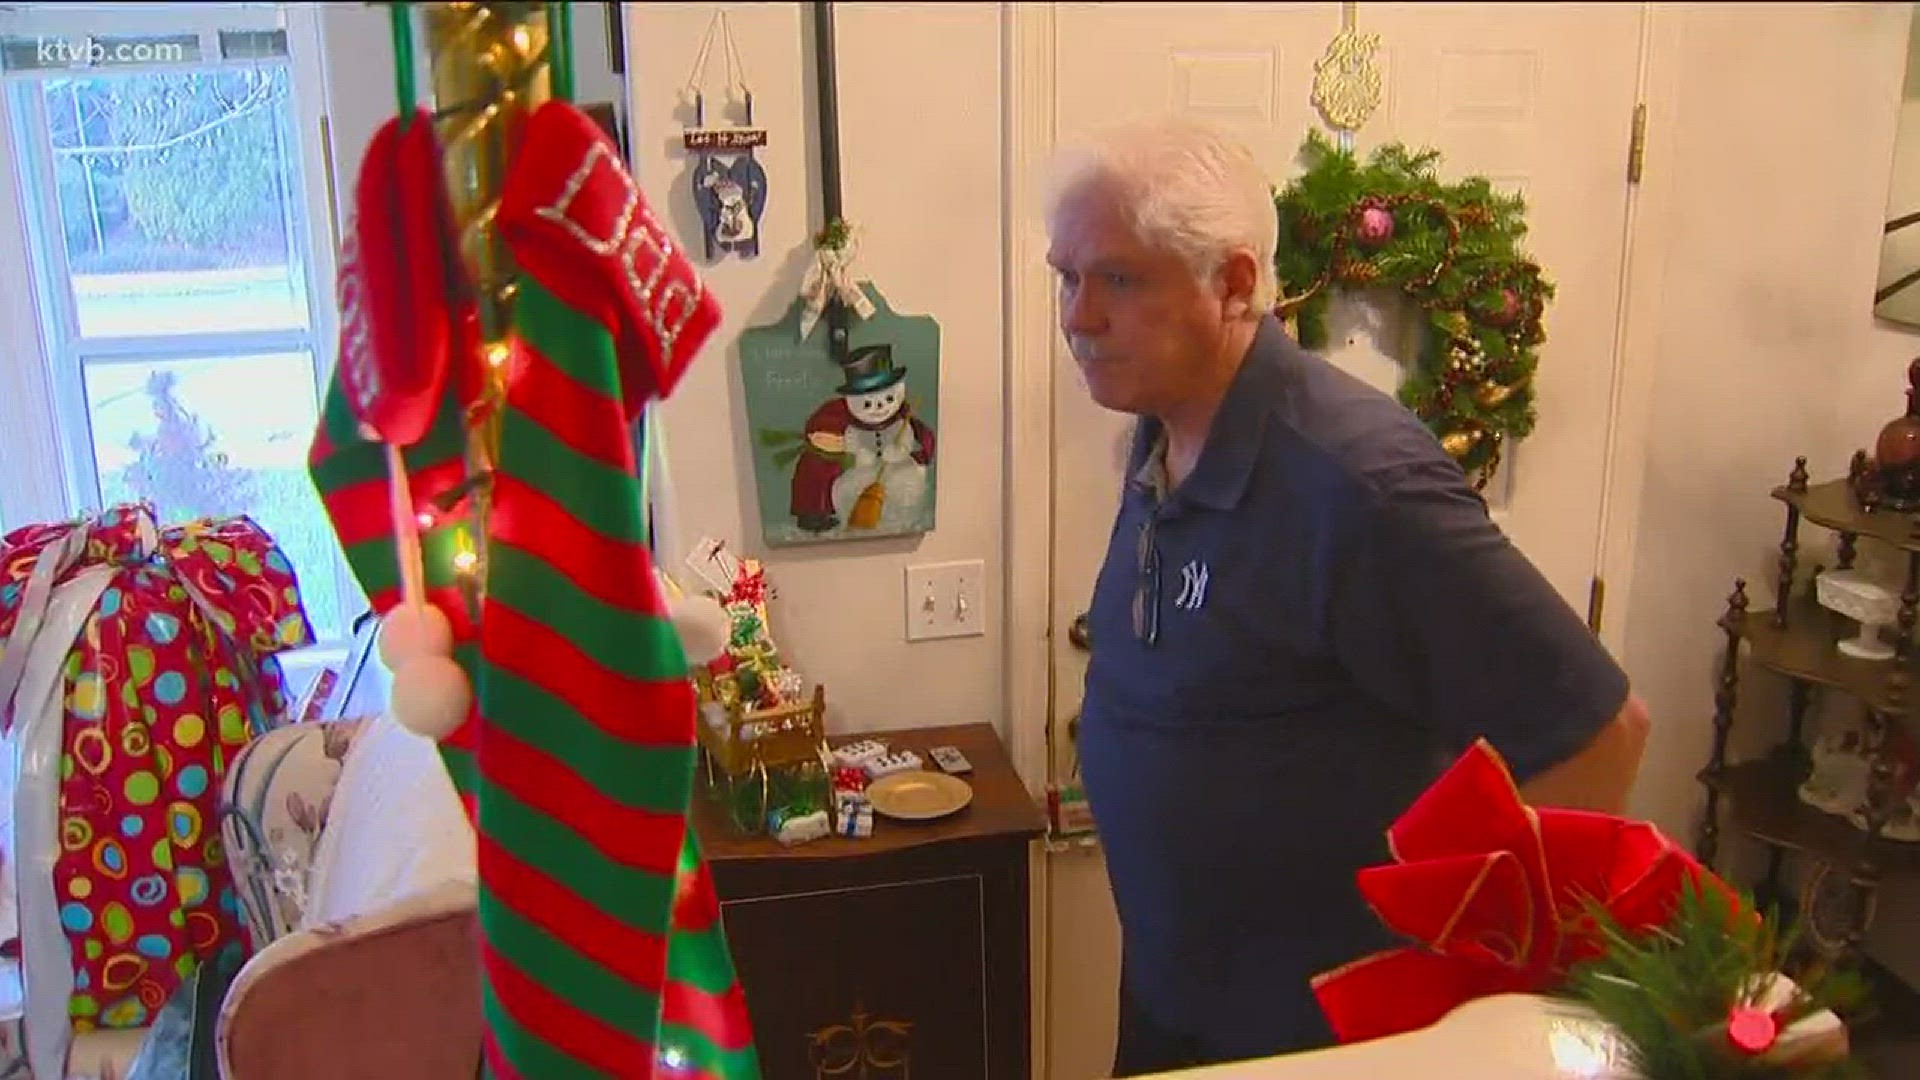 We've all seen the houses that hit the holiday decorating hard, with tens of thousands of flashing lights strung across the house and inflatable Christmas characters covering the front lawn. But one Boise man's indoor decorations put you inside a personal